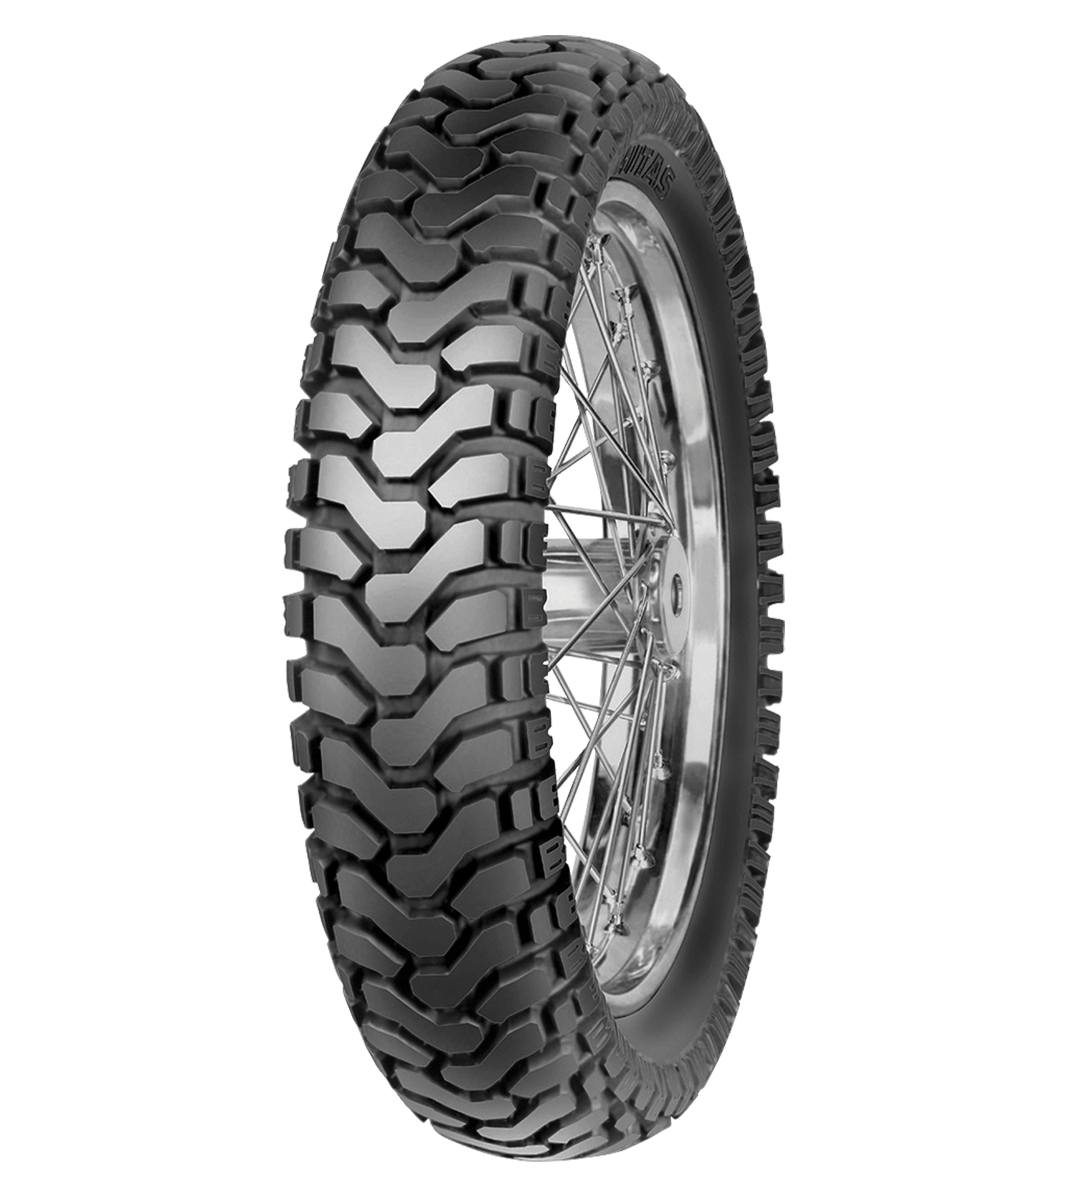 Mitas E-07 ENDURO 130/80-18 Trail OFF Trail 72T No Stripe Tubeless Rear Tire, 224415, 130/80-18, Adventure Touring, E Series, E-07 Enduro, Rear, Trail, Trail OFF, Tires - Imported and distributed in North &amp; South America by Lindeco Genuine Powersports - Premier Powersports Equipment and Accessories for Motorcycle Enthusiasts, Professional Riders and Dealers.